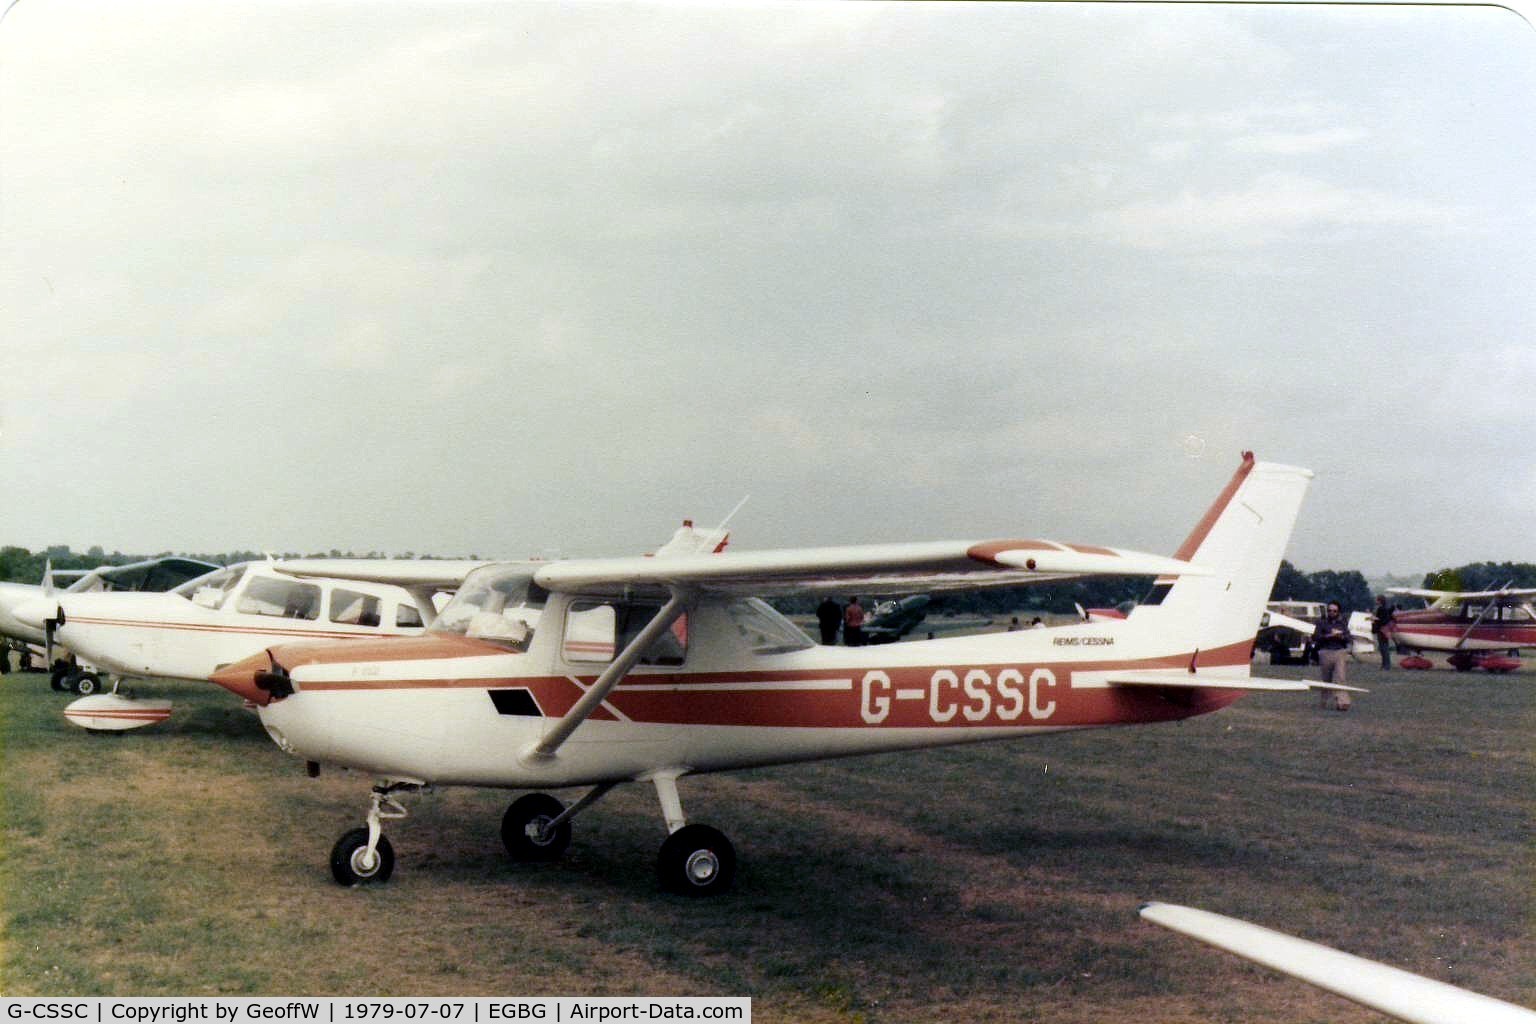 G-CSSC, 1979 Reims F152 C/N 1579, Cessna F152 G-CSSC at the Leicester PFA Rally 1979